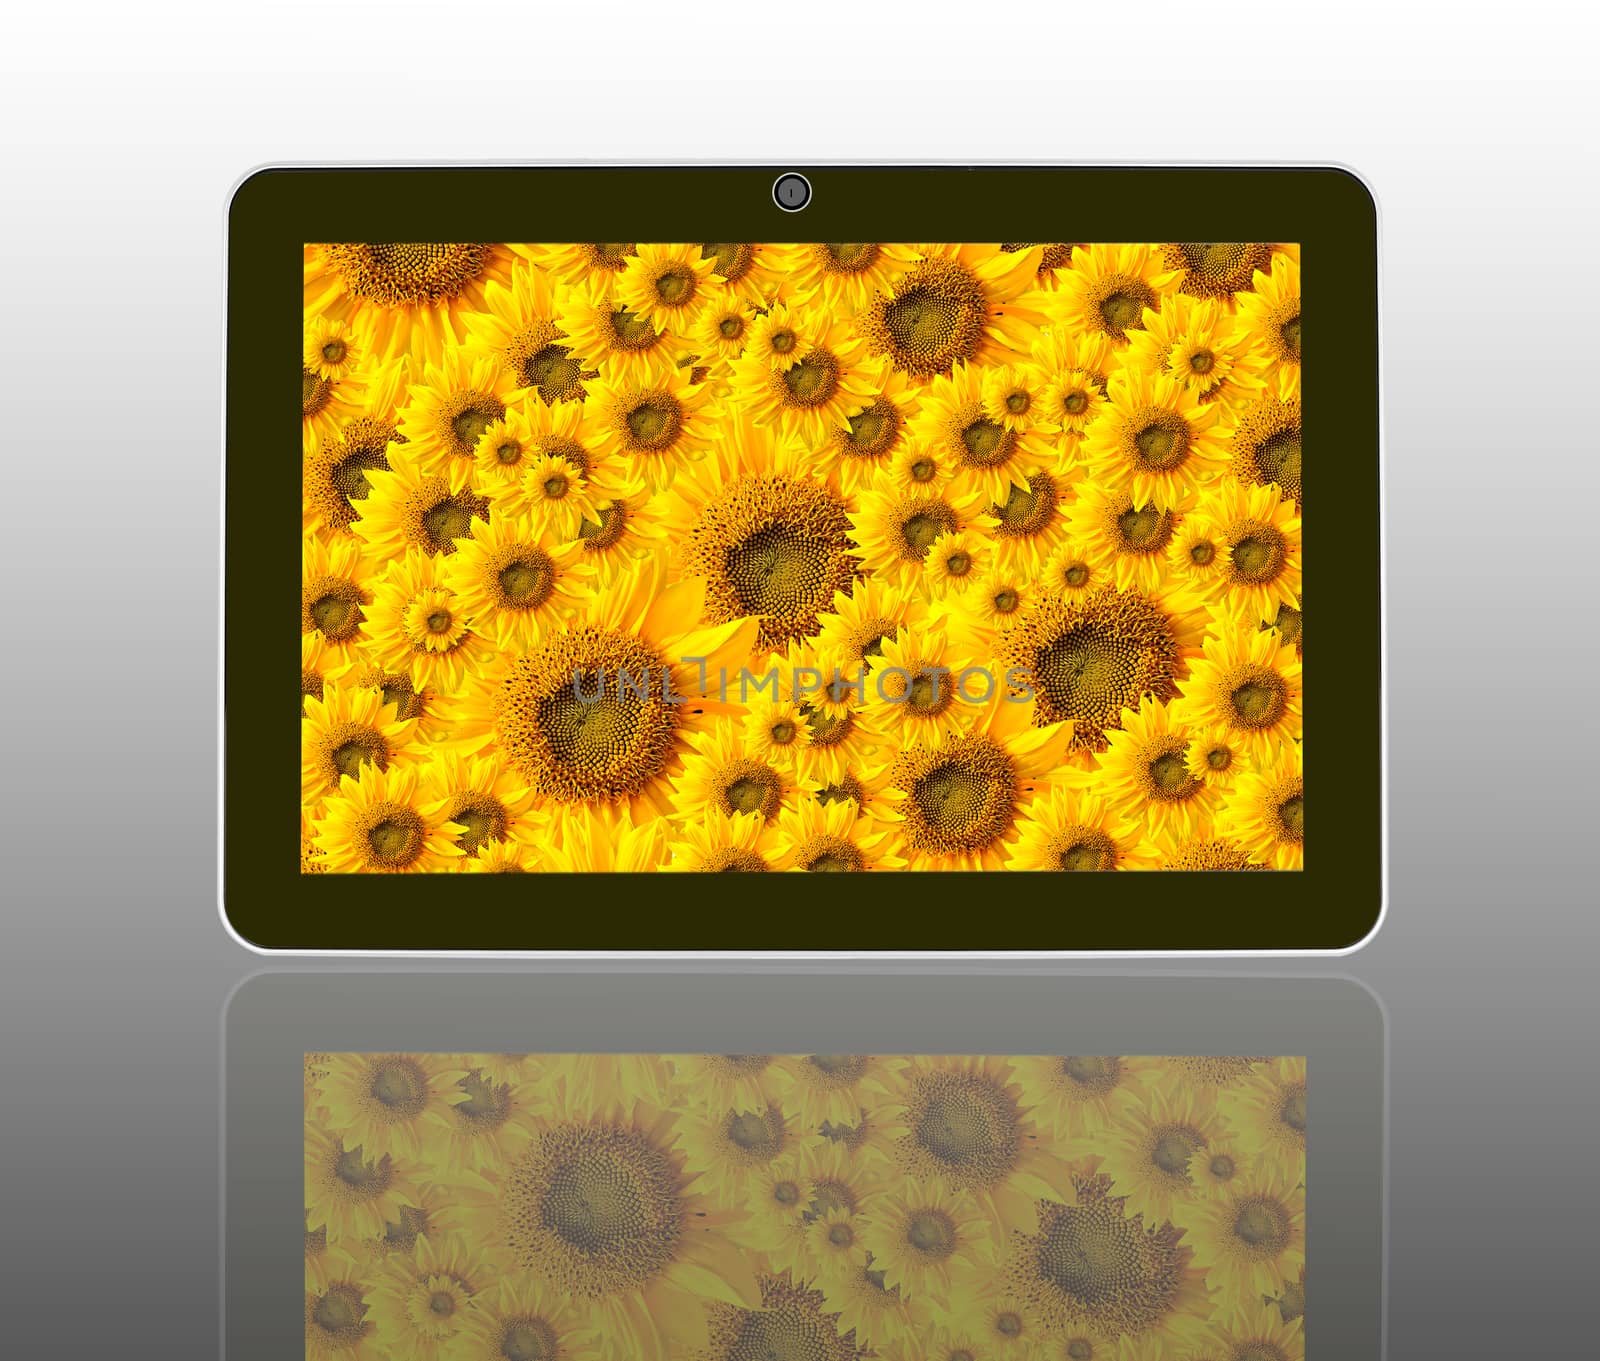 Beautiful sun flowers in theTablet Computer by sommai